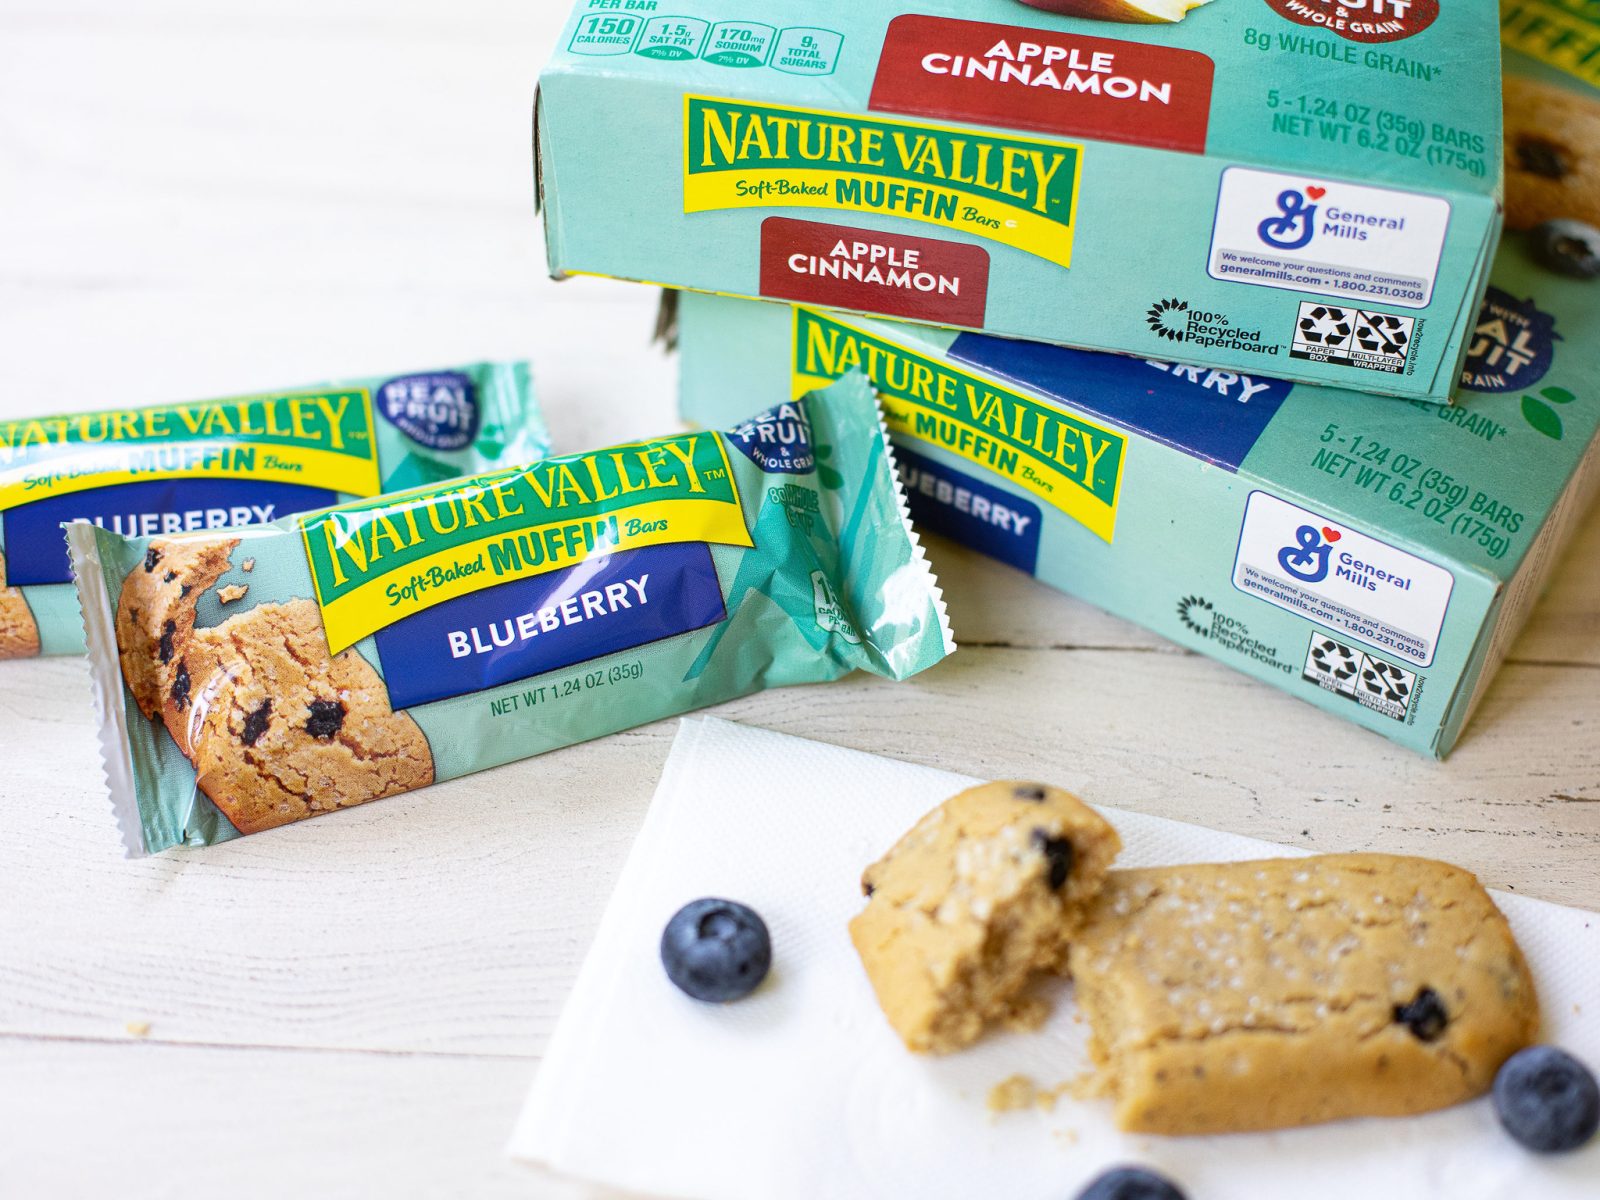 Nature Valley Granola or Soft-Baked Muffin Bars As Low As $1.70 Per Box At Publix